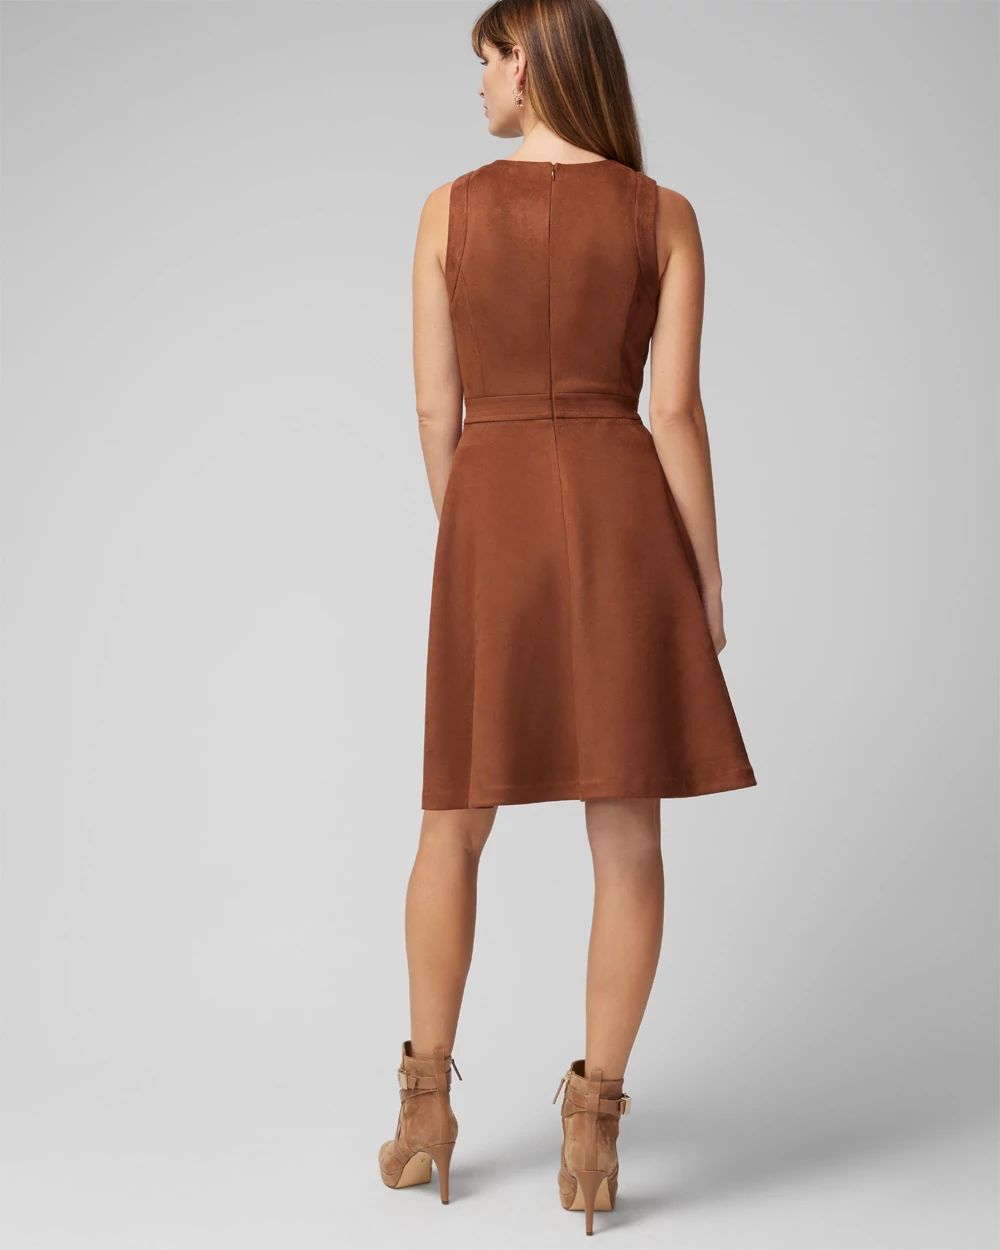 Sleeveless Crest Detail Suede Fit-N-Flare Dress click to view larger image.